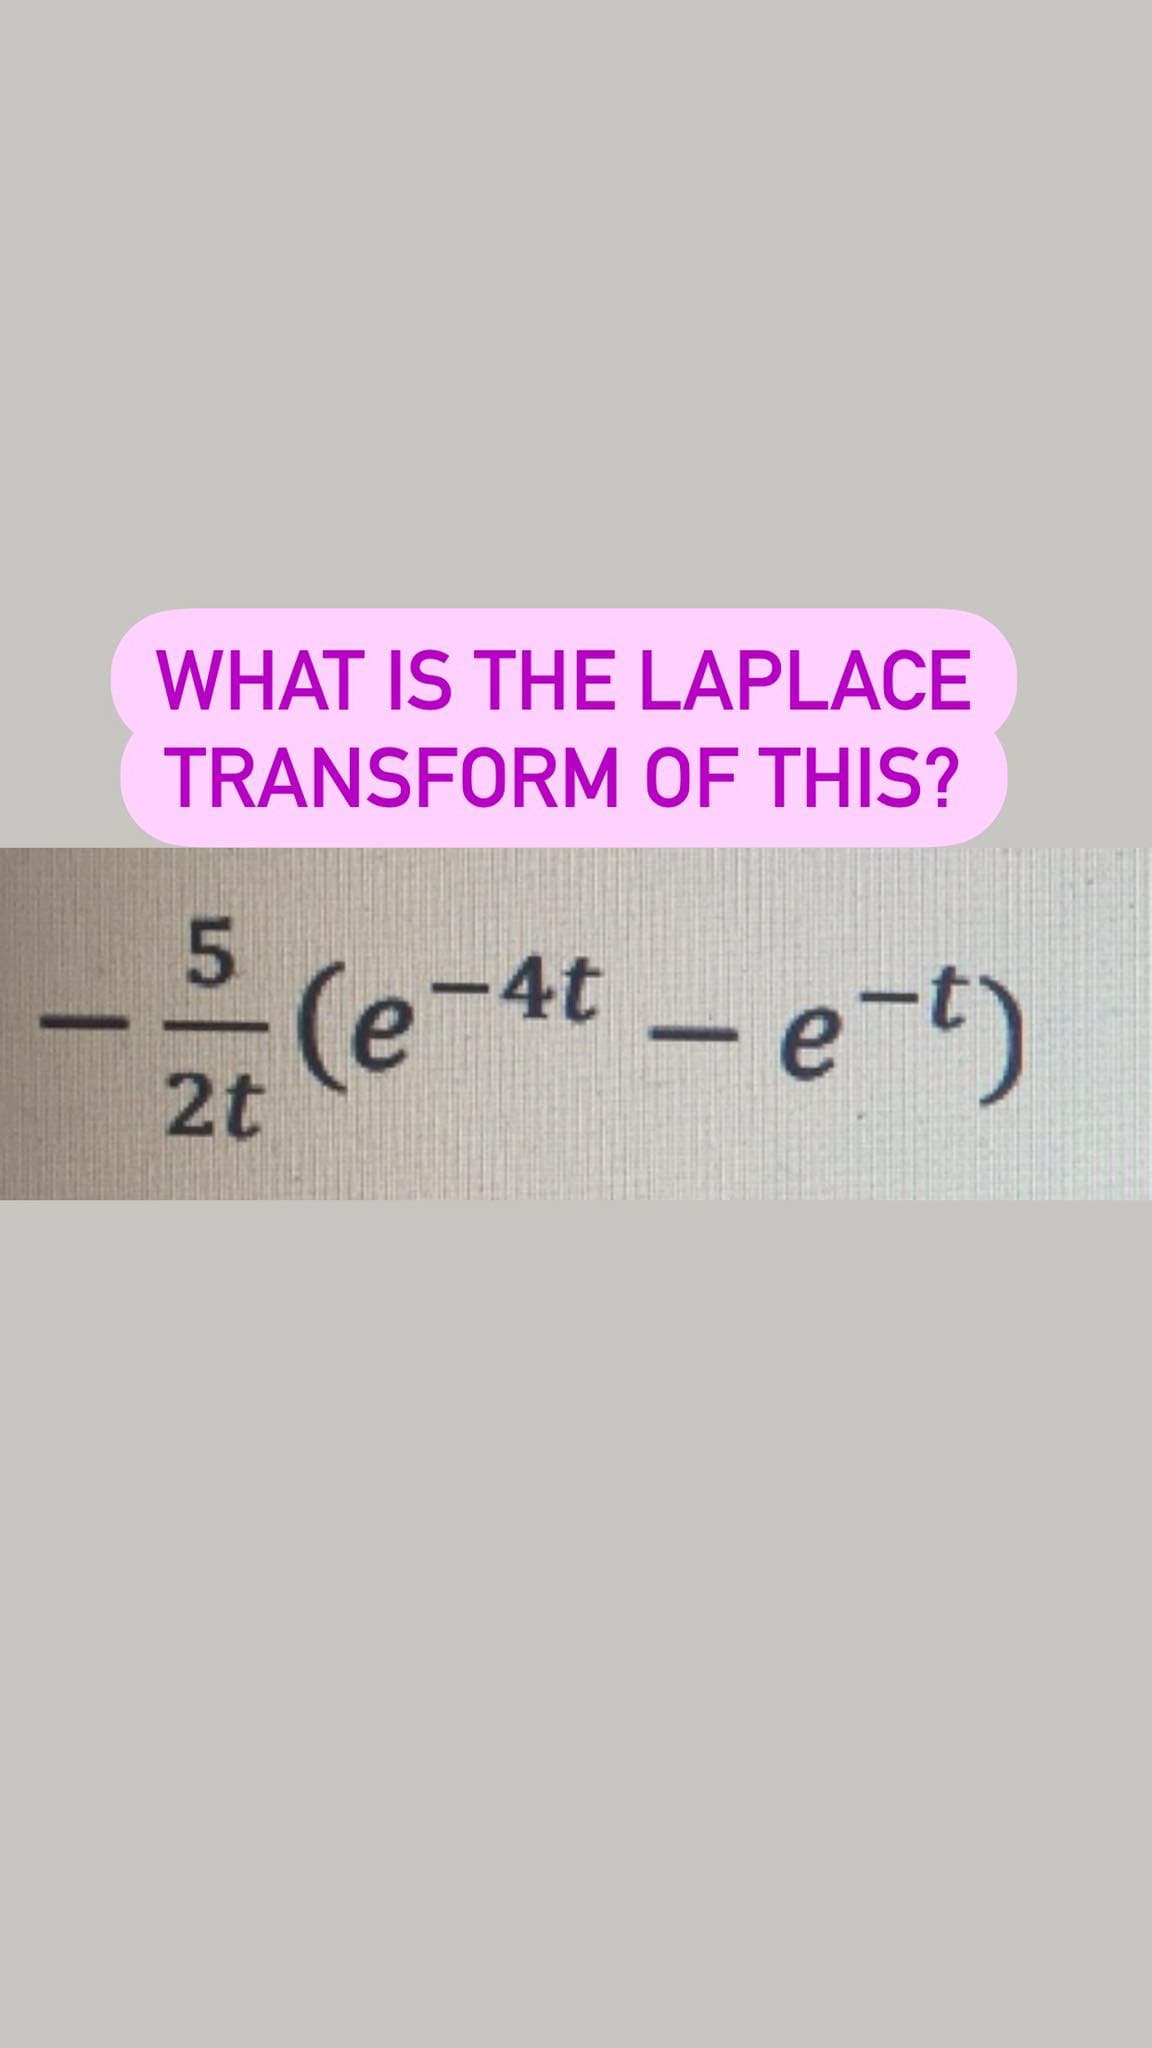 WHAT IS THE LAPLACE
TRANSFORM OF THIS?
5.
(e-4t-e-t)
2t
